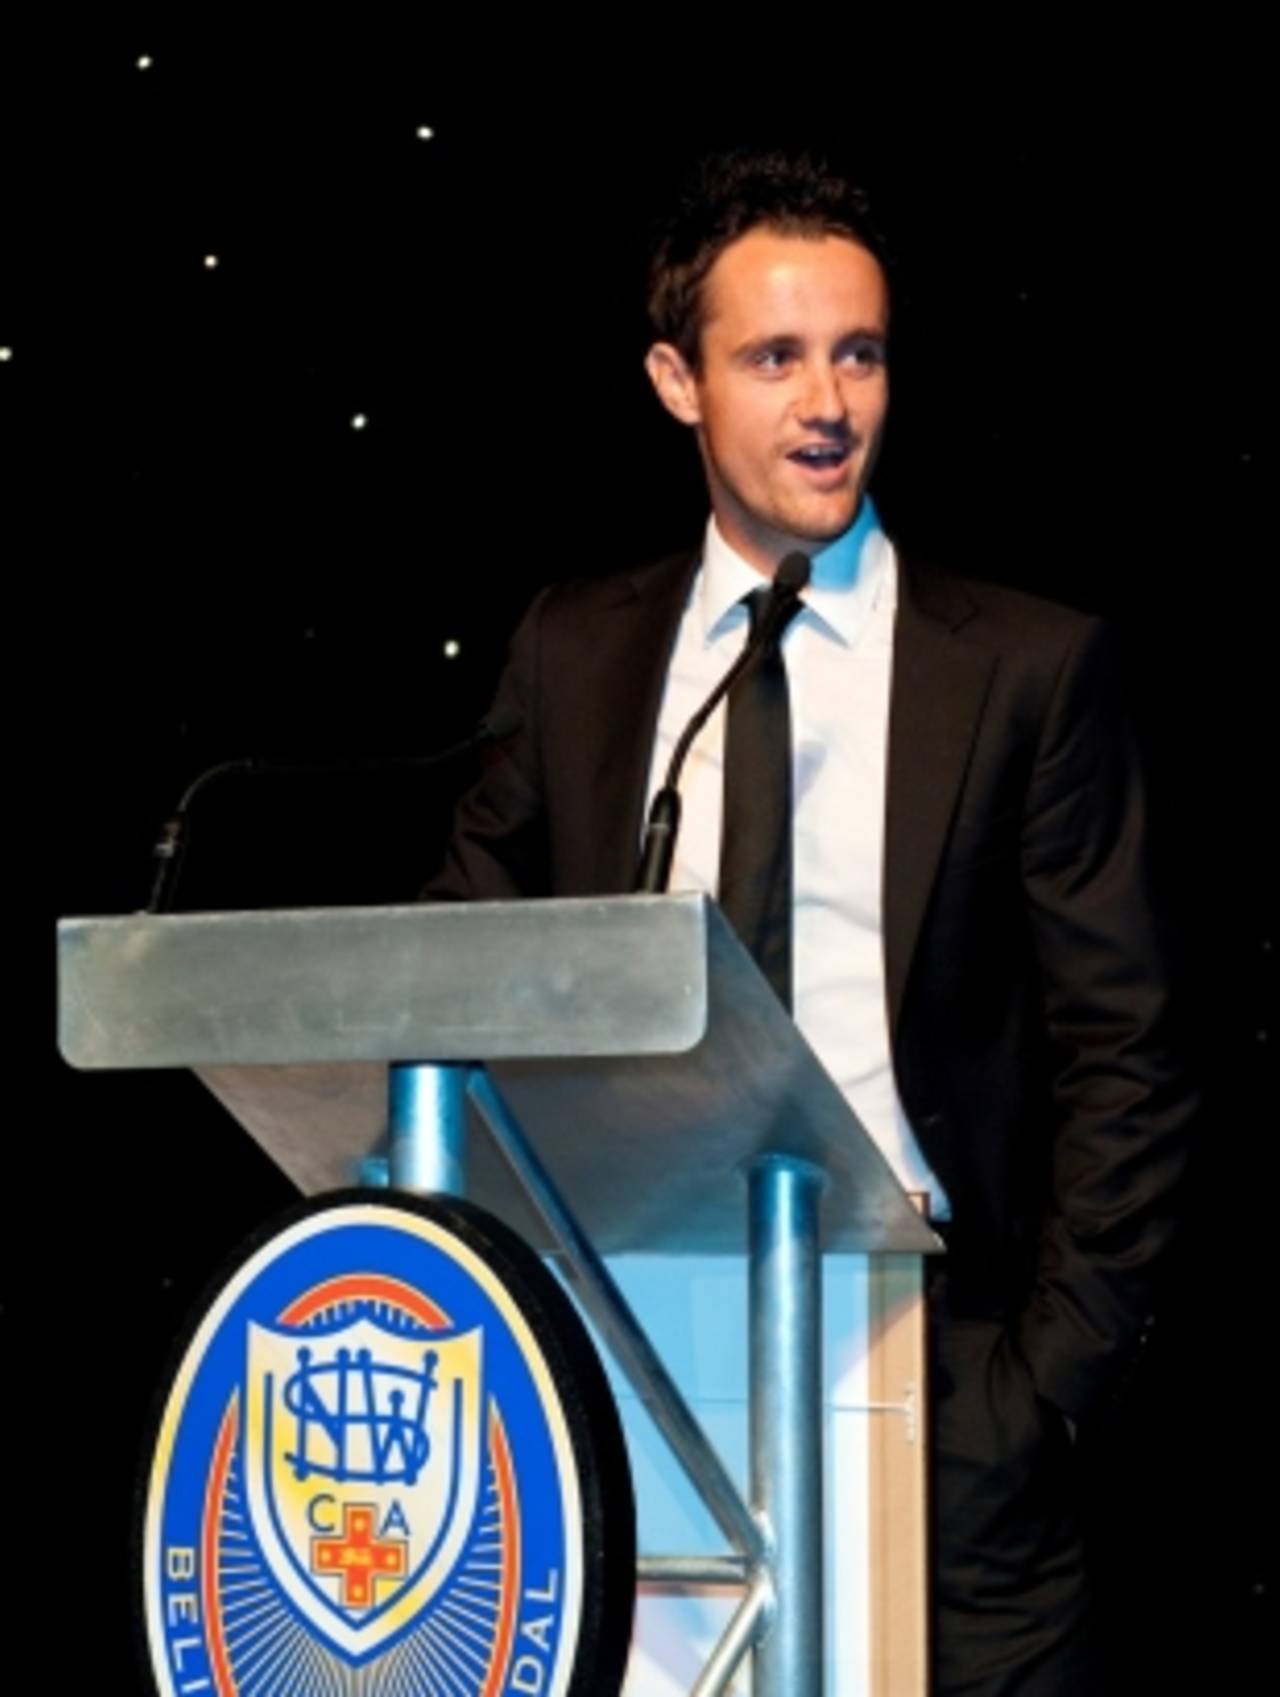 Beau Casson at the Cricket New South Wales awards night, Sydney, March 23, 2012